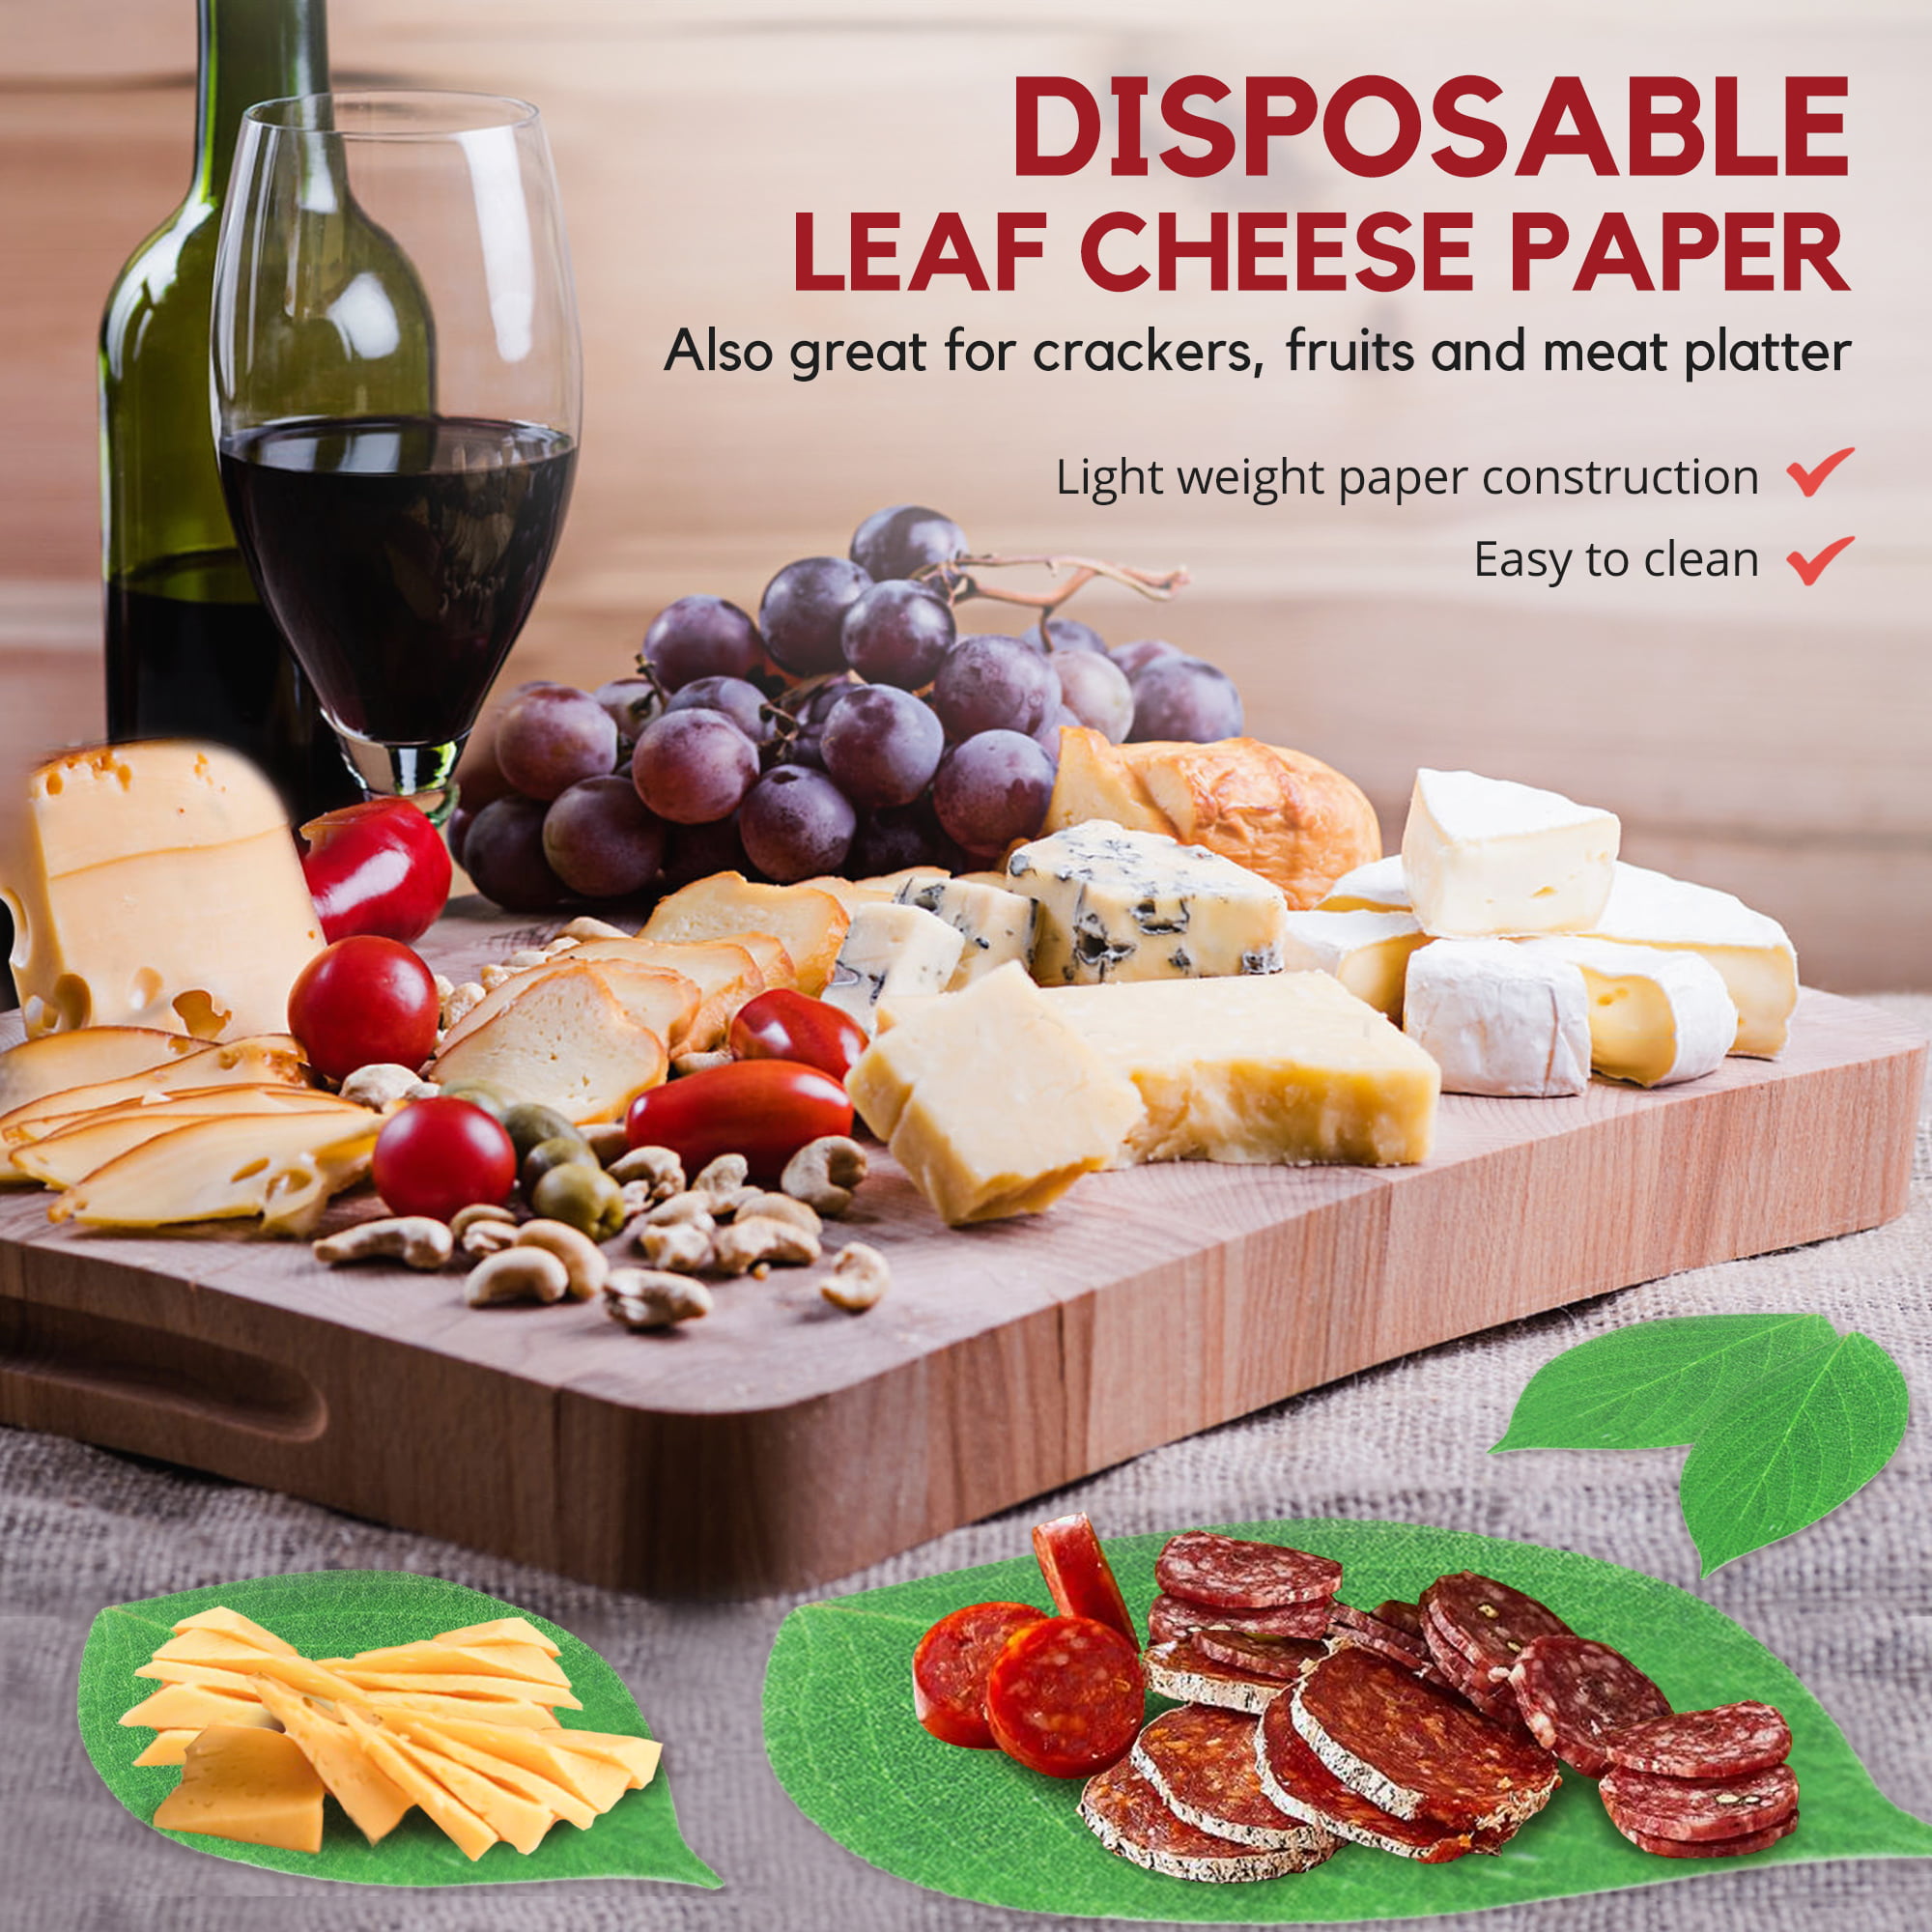 24 Pack] Cheese Paper for Charcuterie Boards - Olive Wood and Leaf Design  Cheeseboard Accessories, Disposable Grease Resistant Decorative Parchment  Sheets in Serving Trays, Fruits, Sushi Meat Platter 